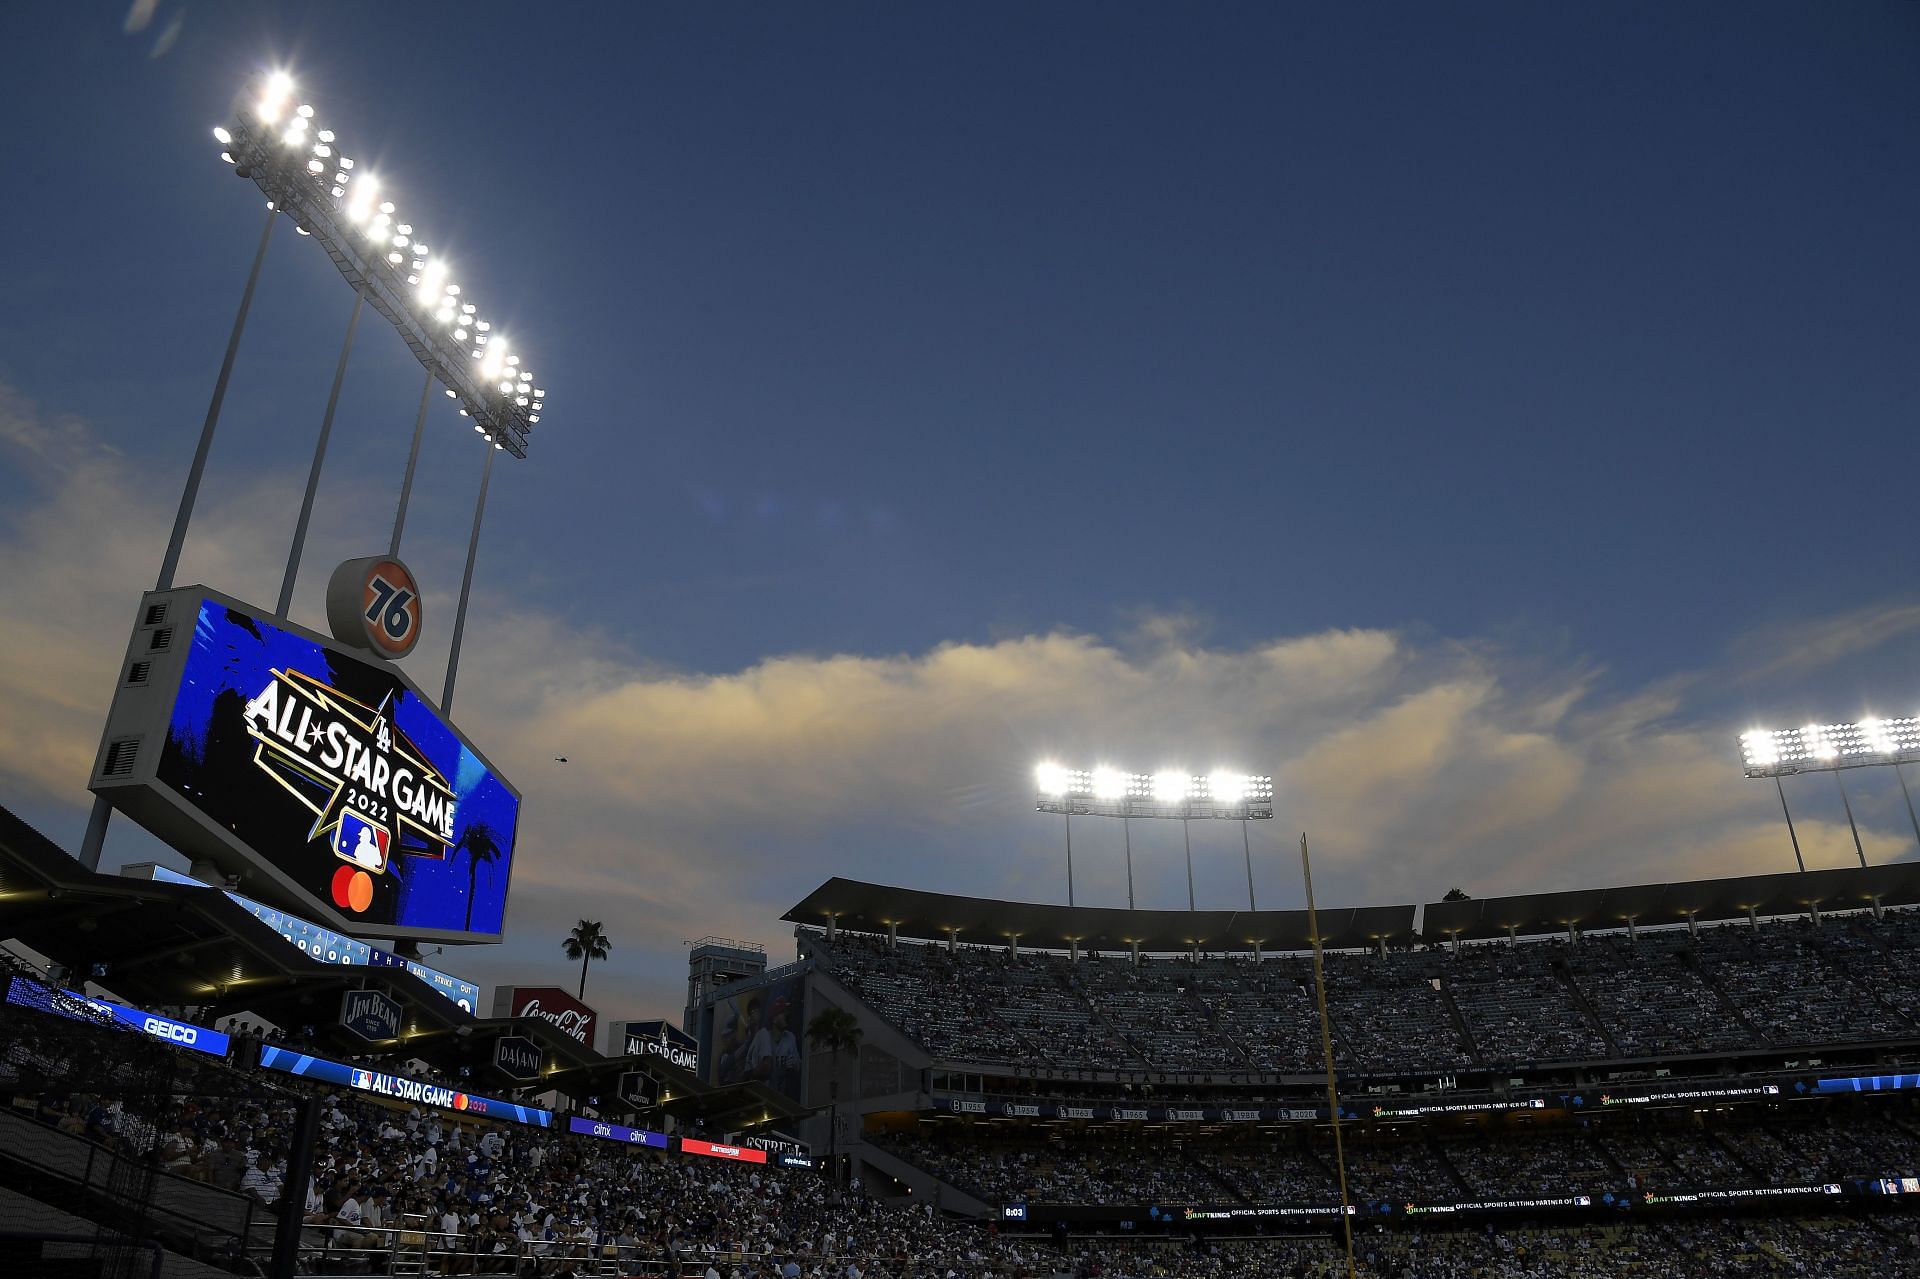 Dodger Stadium played host to the 92nd All-Star Game presented by Mastercard.